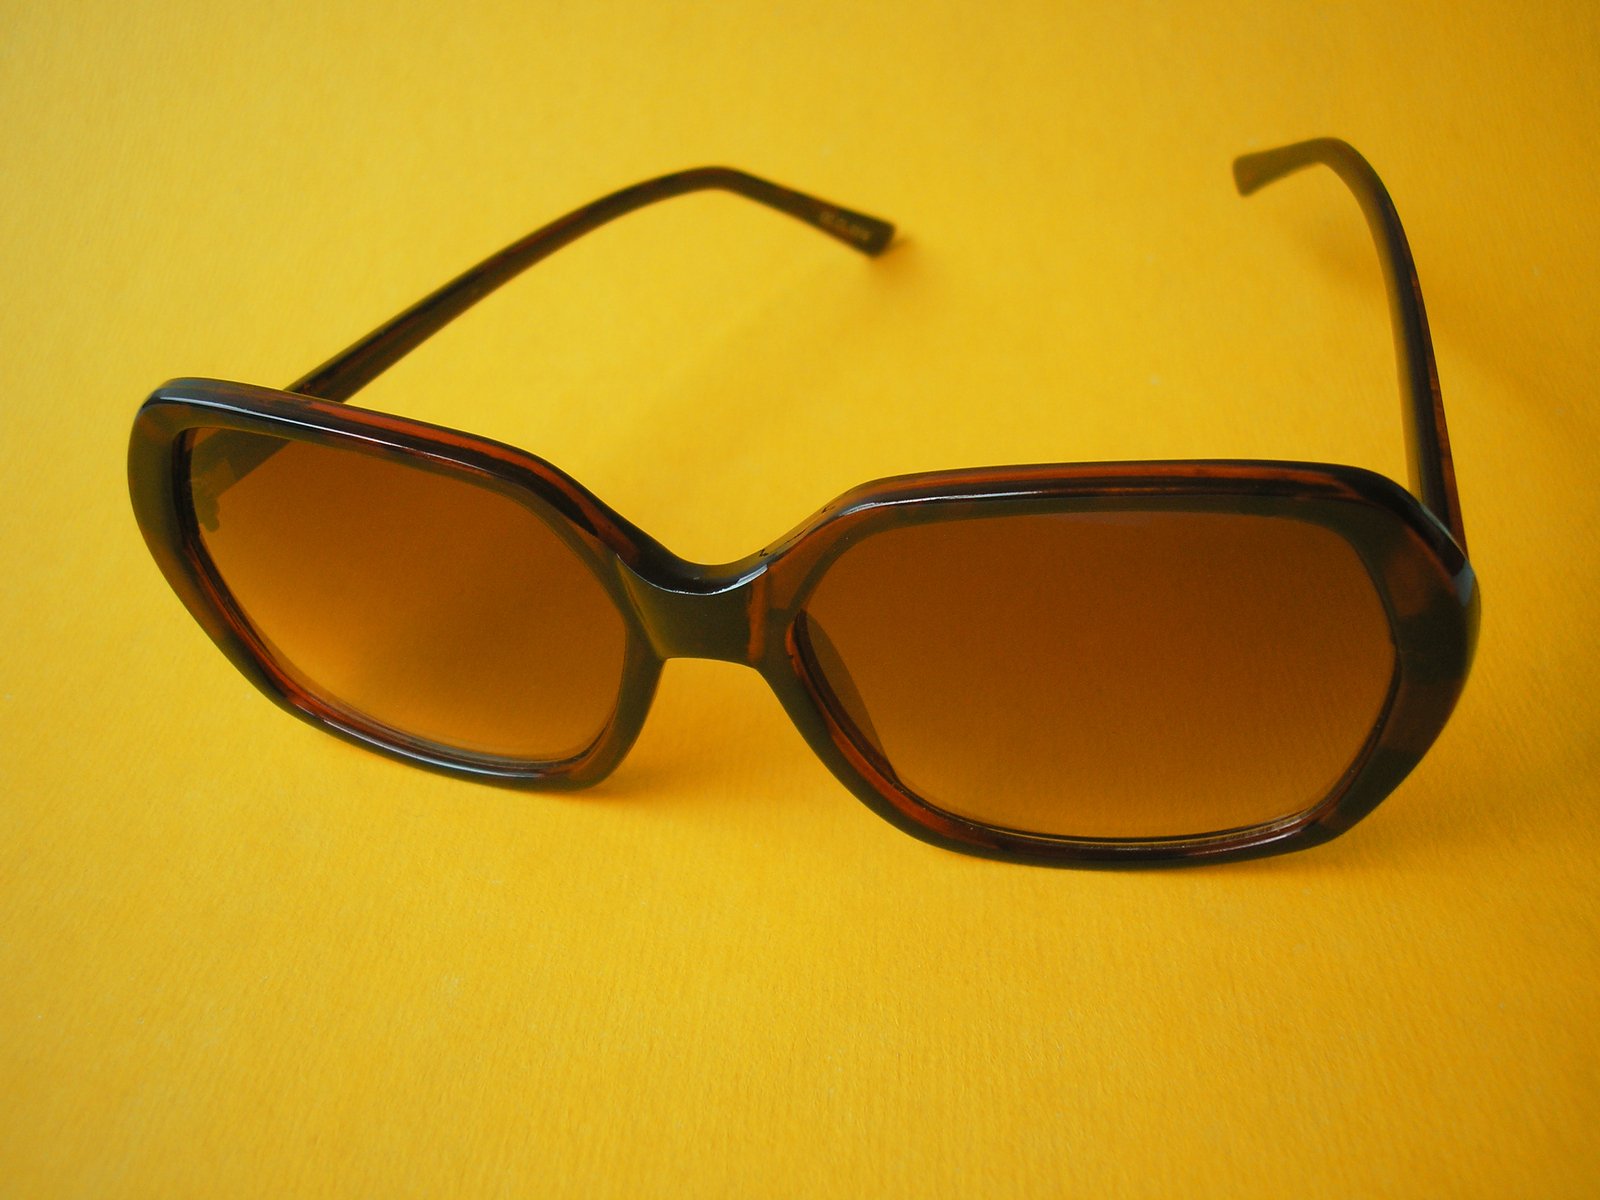 a pair of brown sunglasses on top of a yellow surface